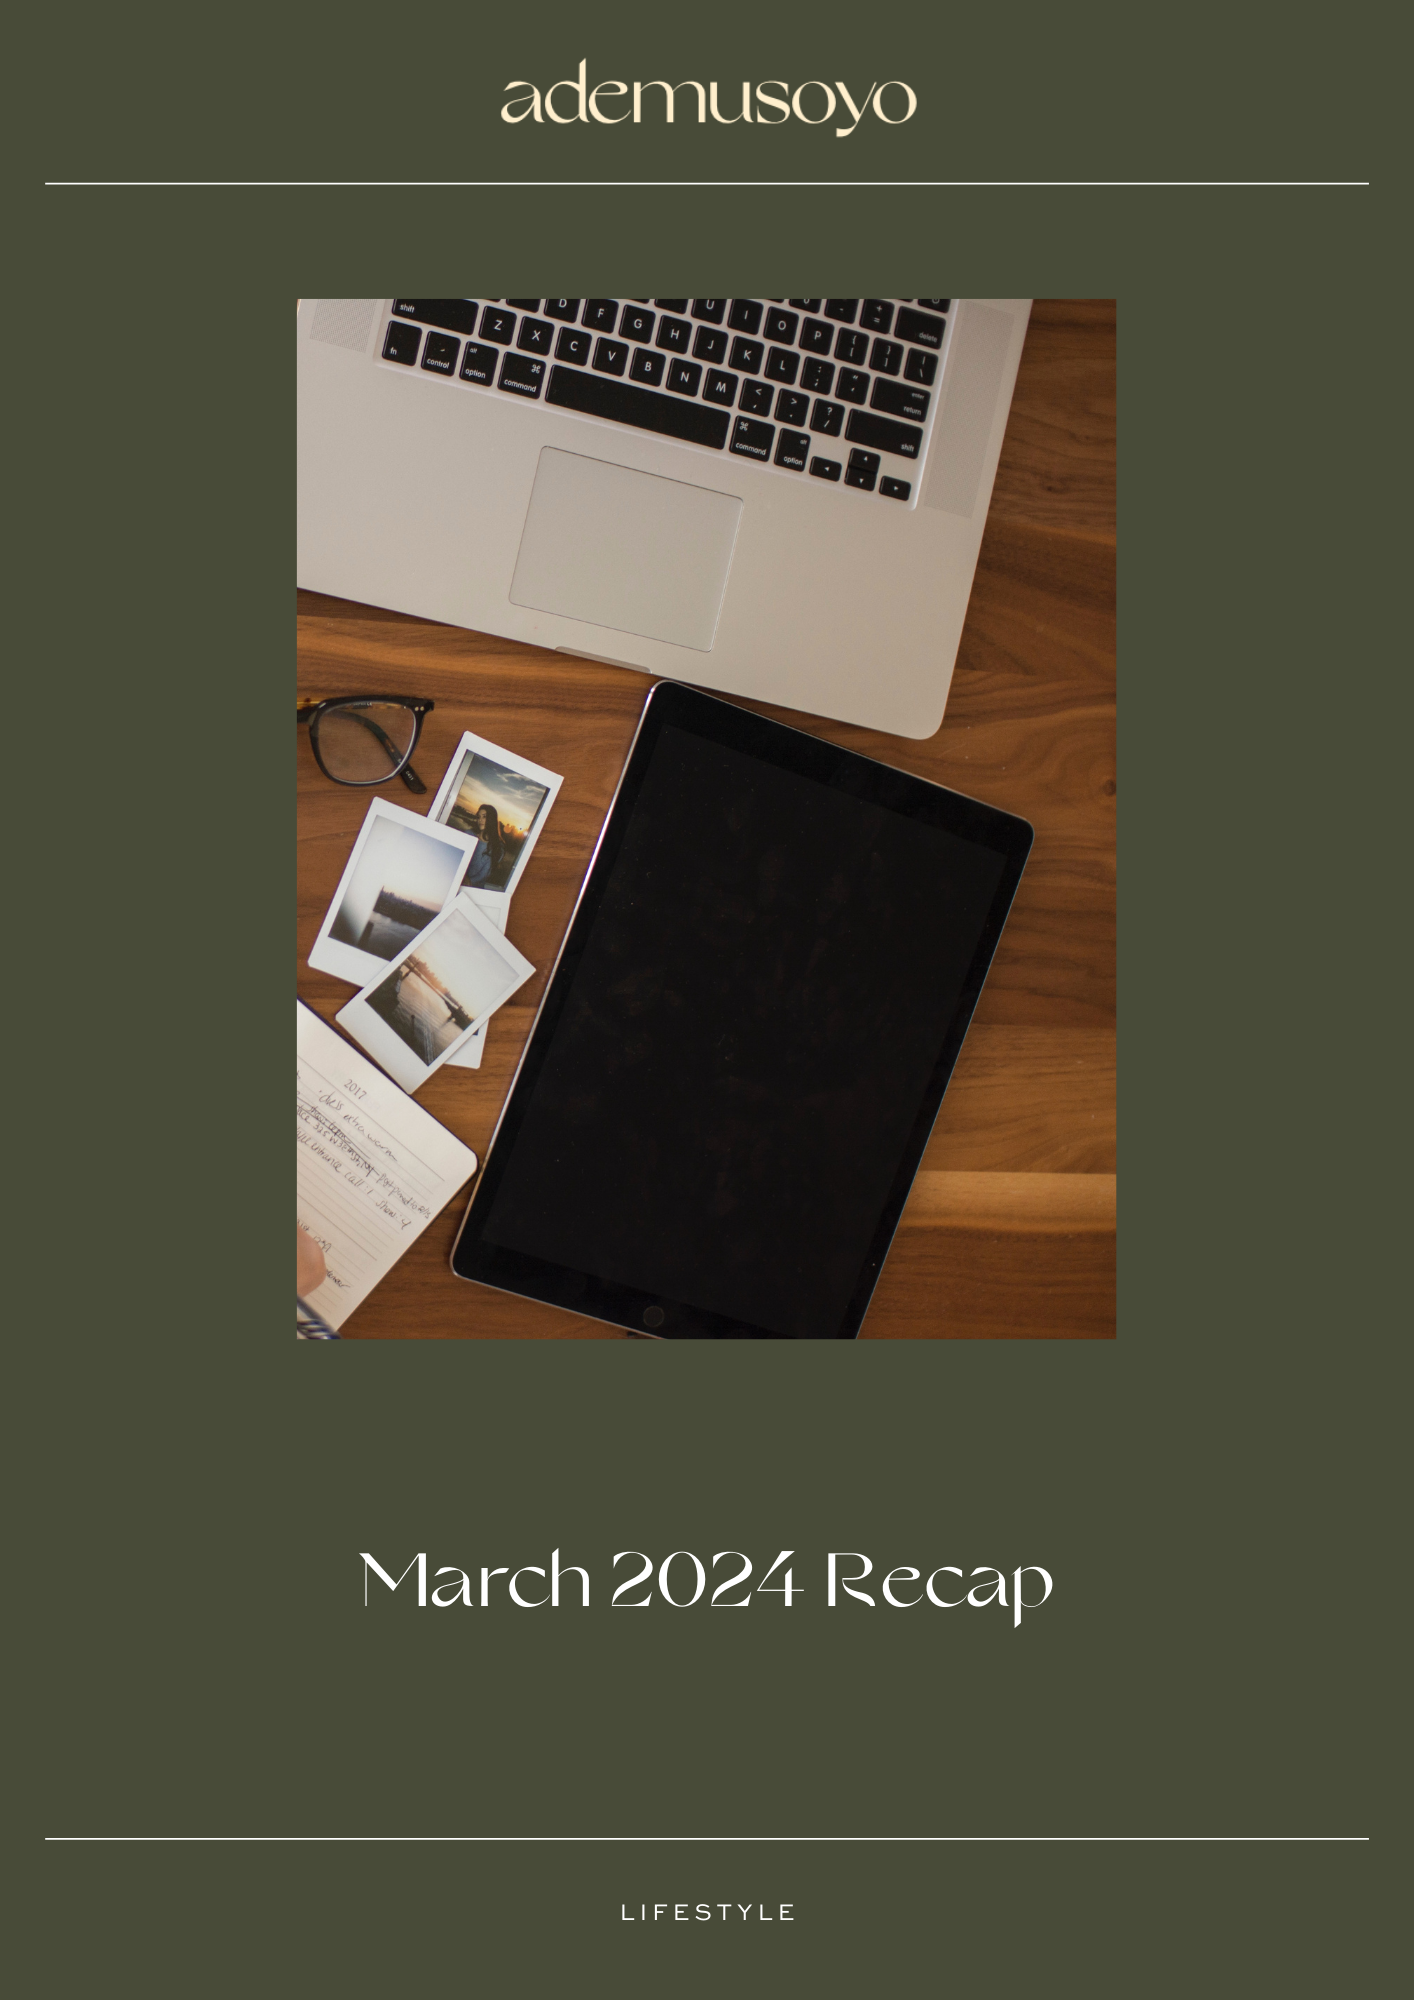 a blog cover image for a blog post about Ademusoyo's March 2024 recap